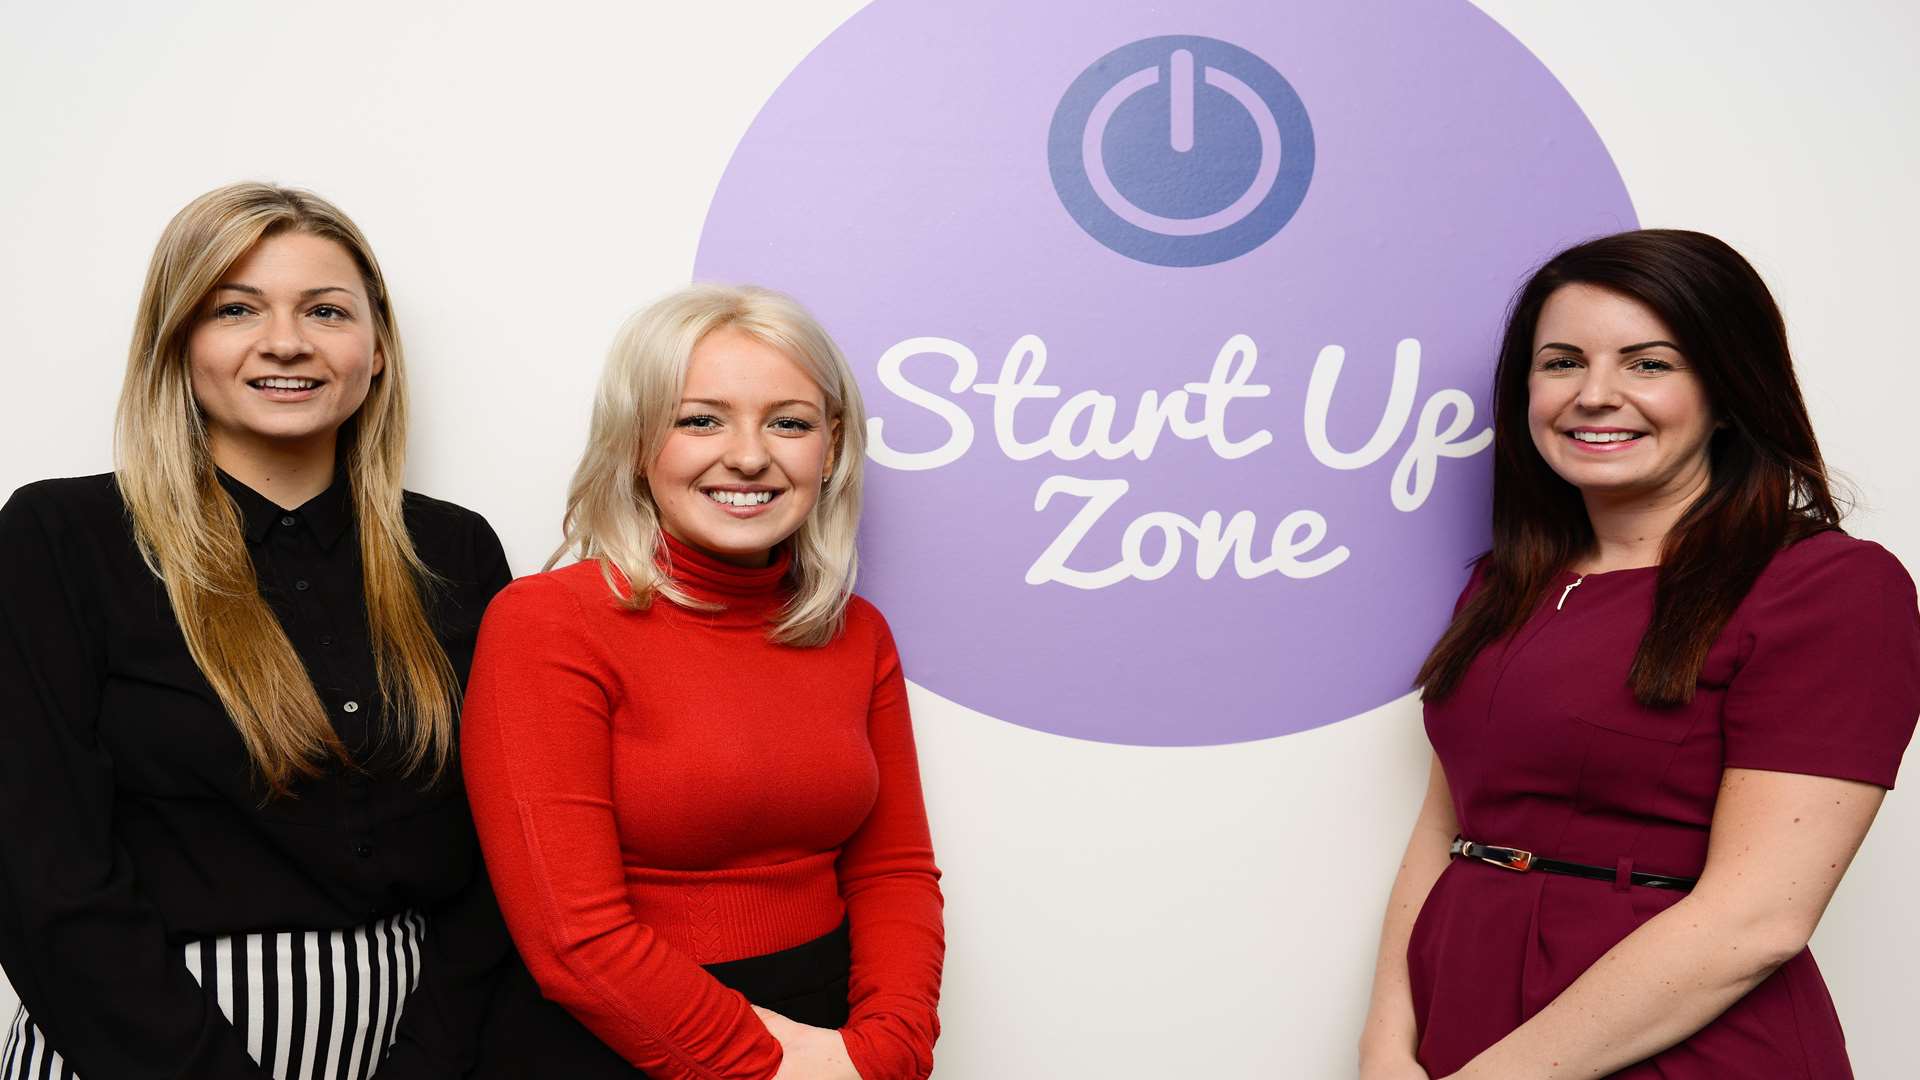 Renata Harmadyova, Anna Stone and Lauren Moore from the Discovery Park leasing team handle inquiries to join the Start Up Zone